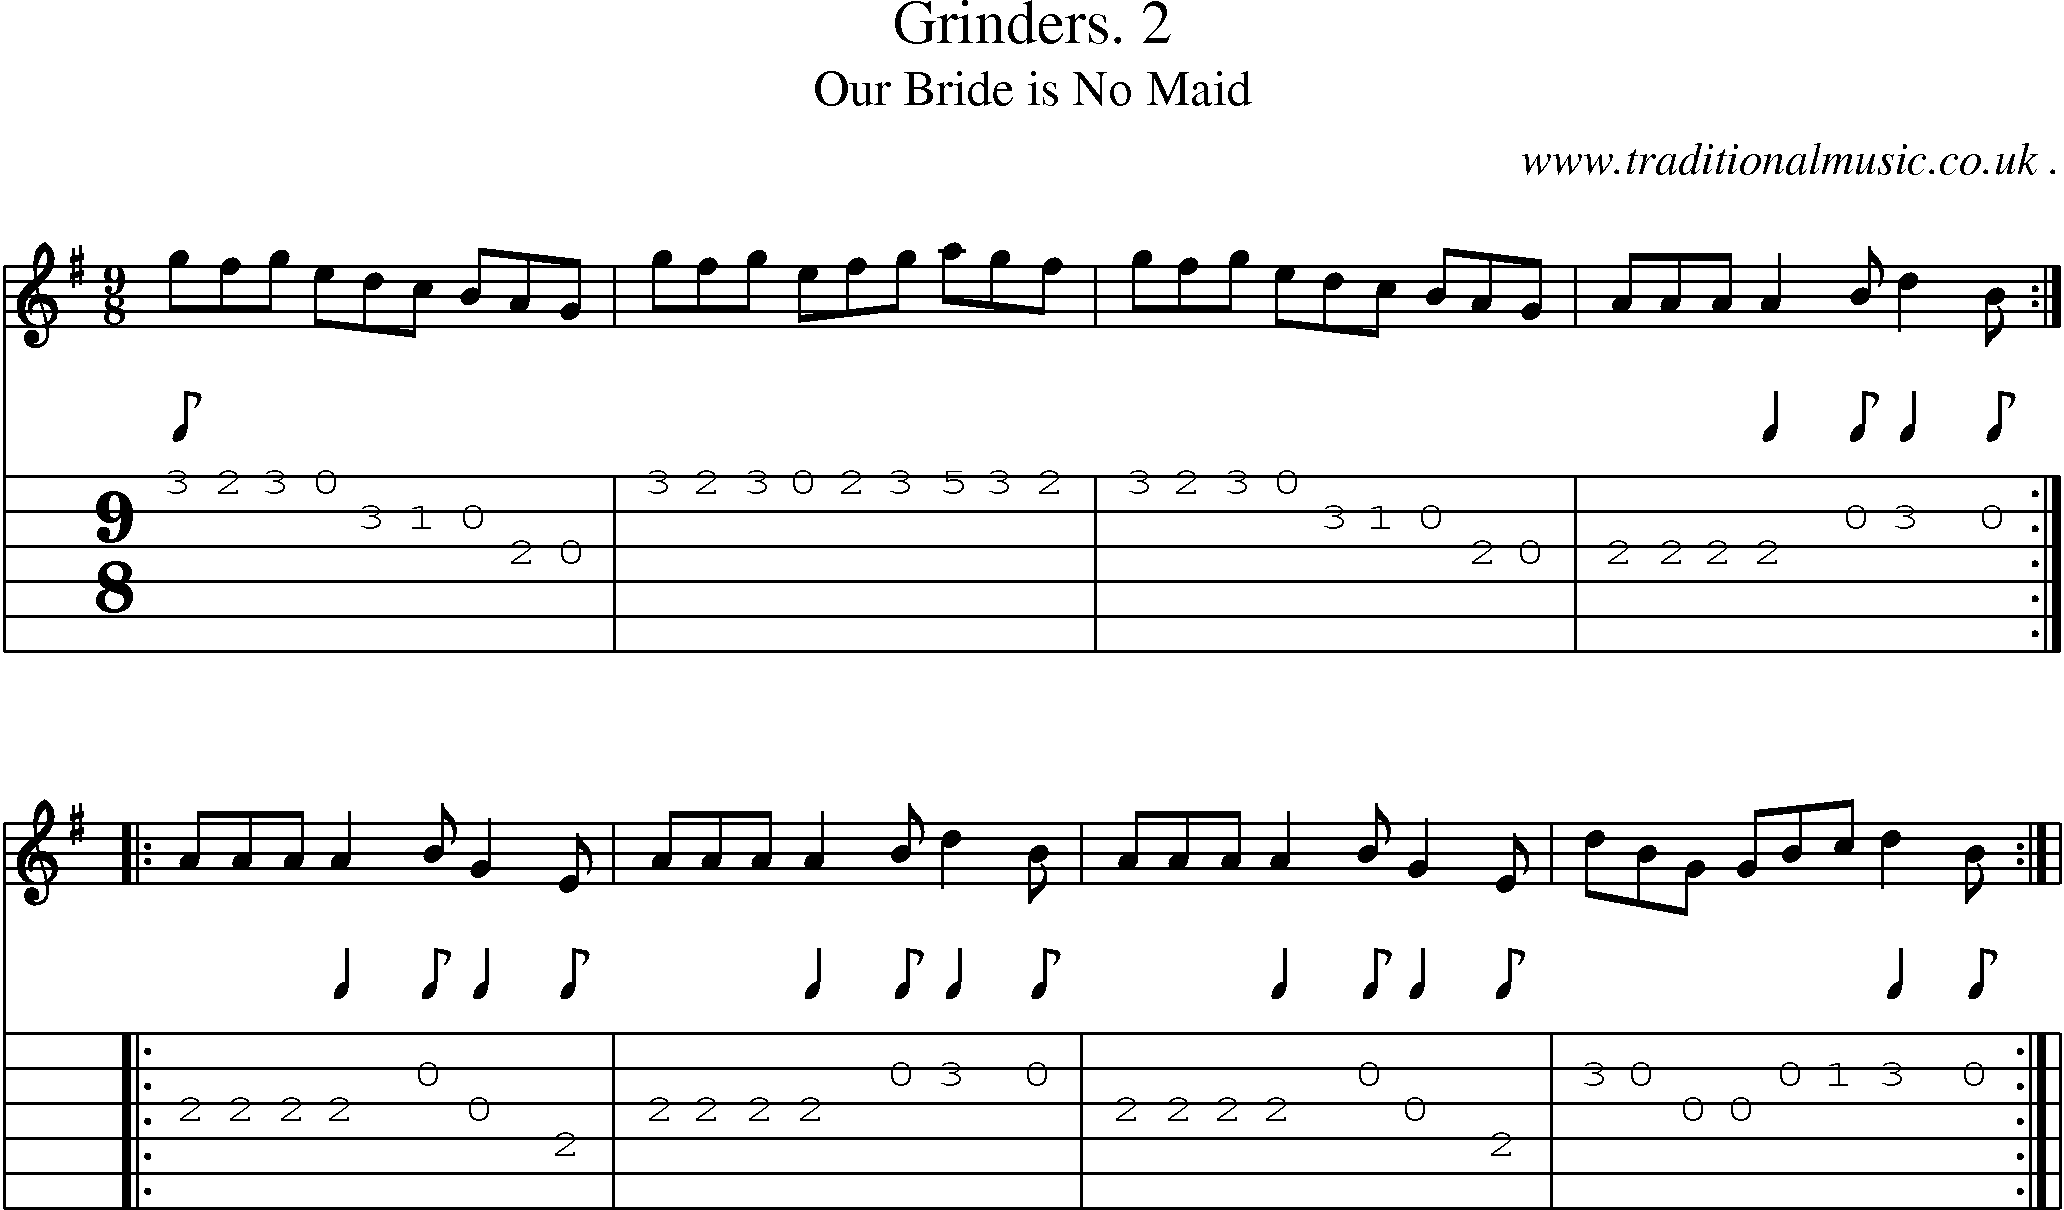 Sheet-Music and Guitar Tabs for Grinders 2